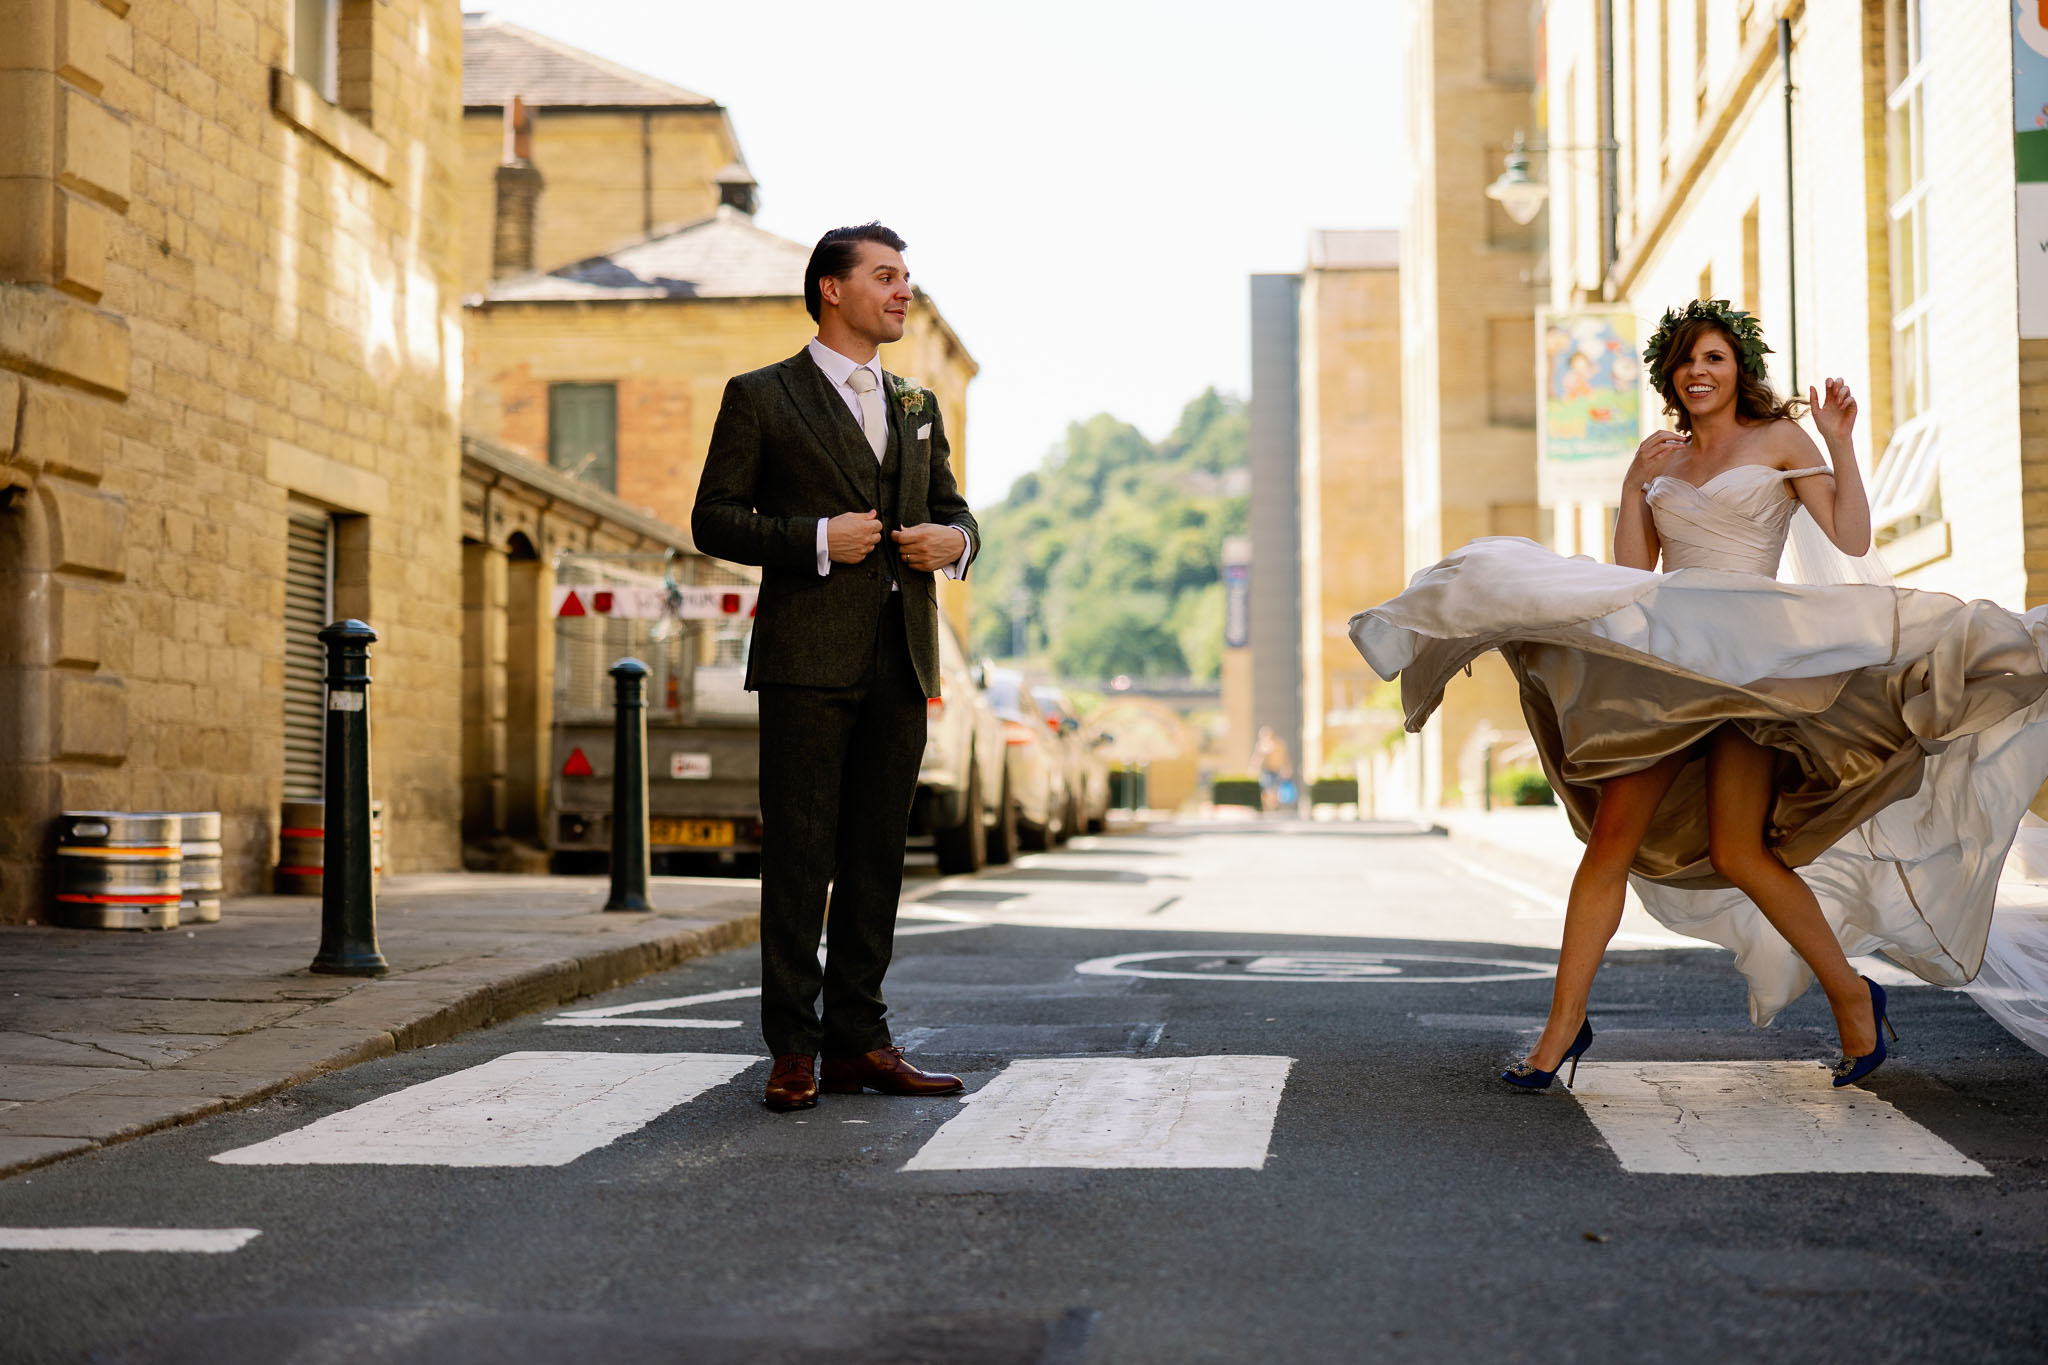 Amazing bride and groom portraits at an industrial wedding venue